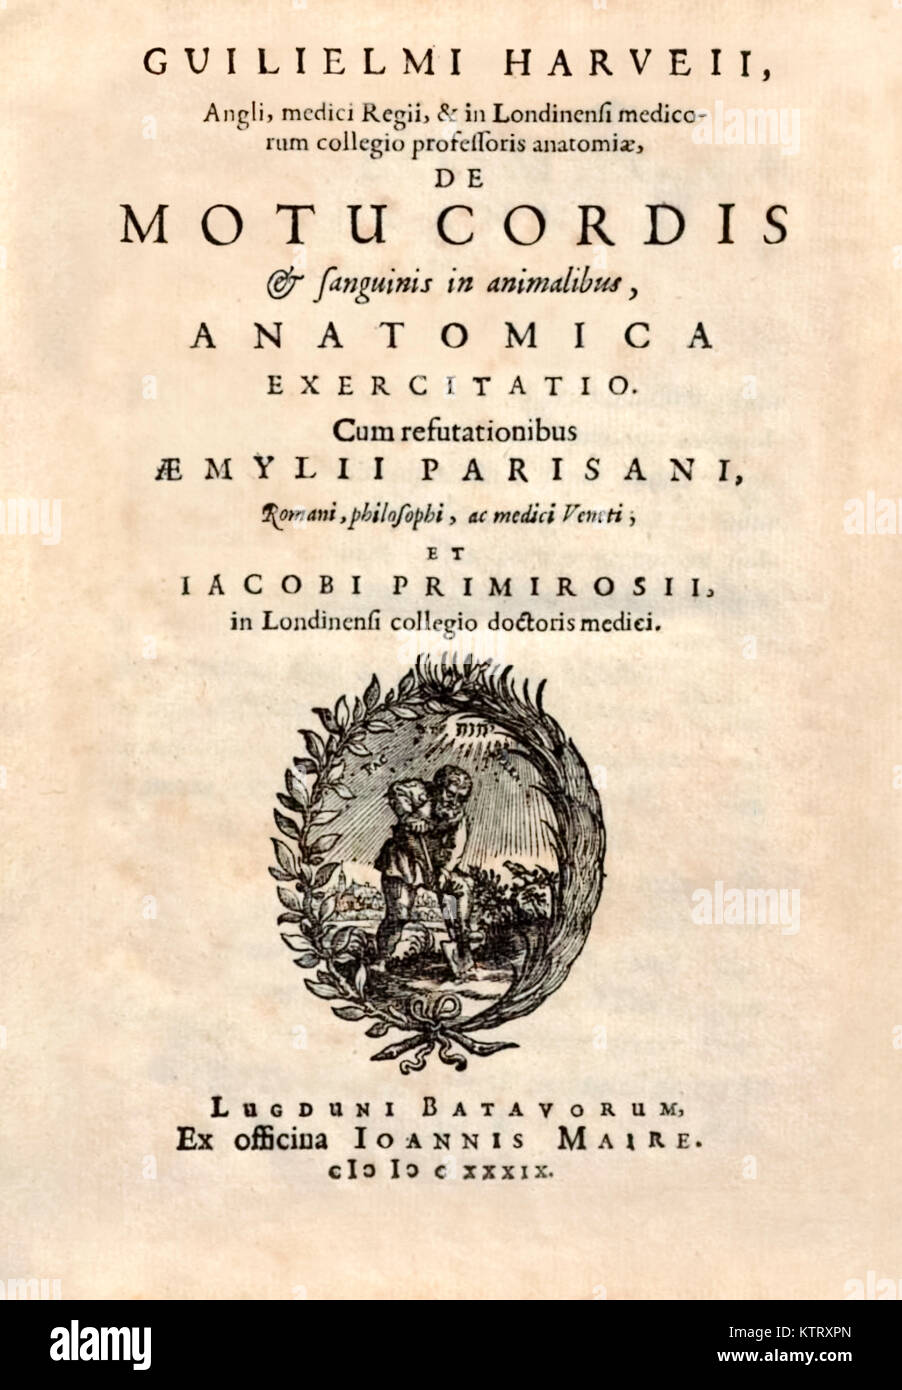 Title page from ‘De Motu Cordis set Sanguinis in Animalibus’ (The Motion of the Heart and Blood in Living Beings) by William Harvey (1578-1657). See more information below. Stock Photo